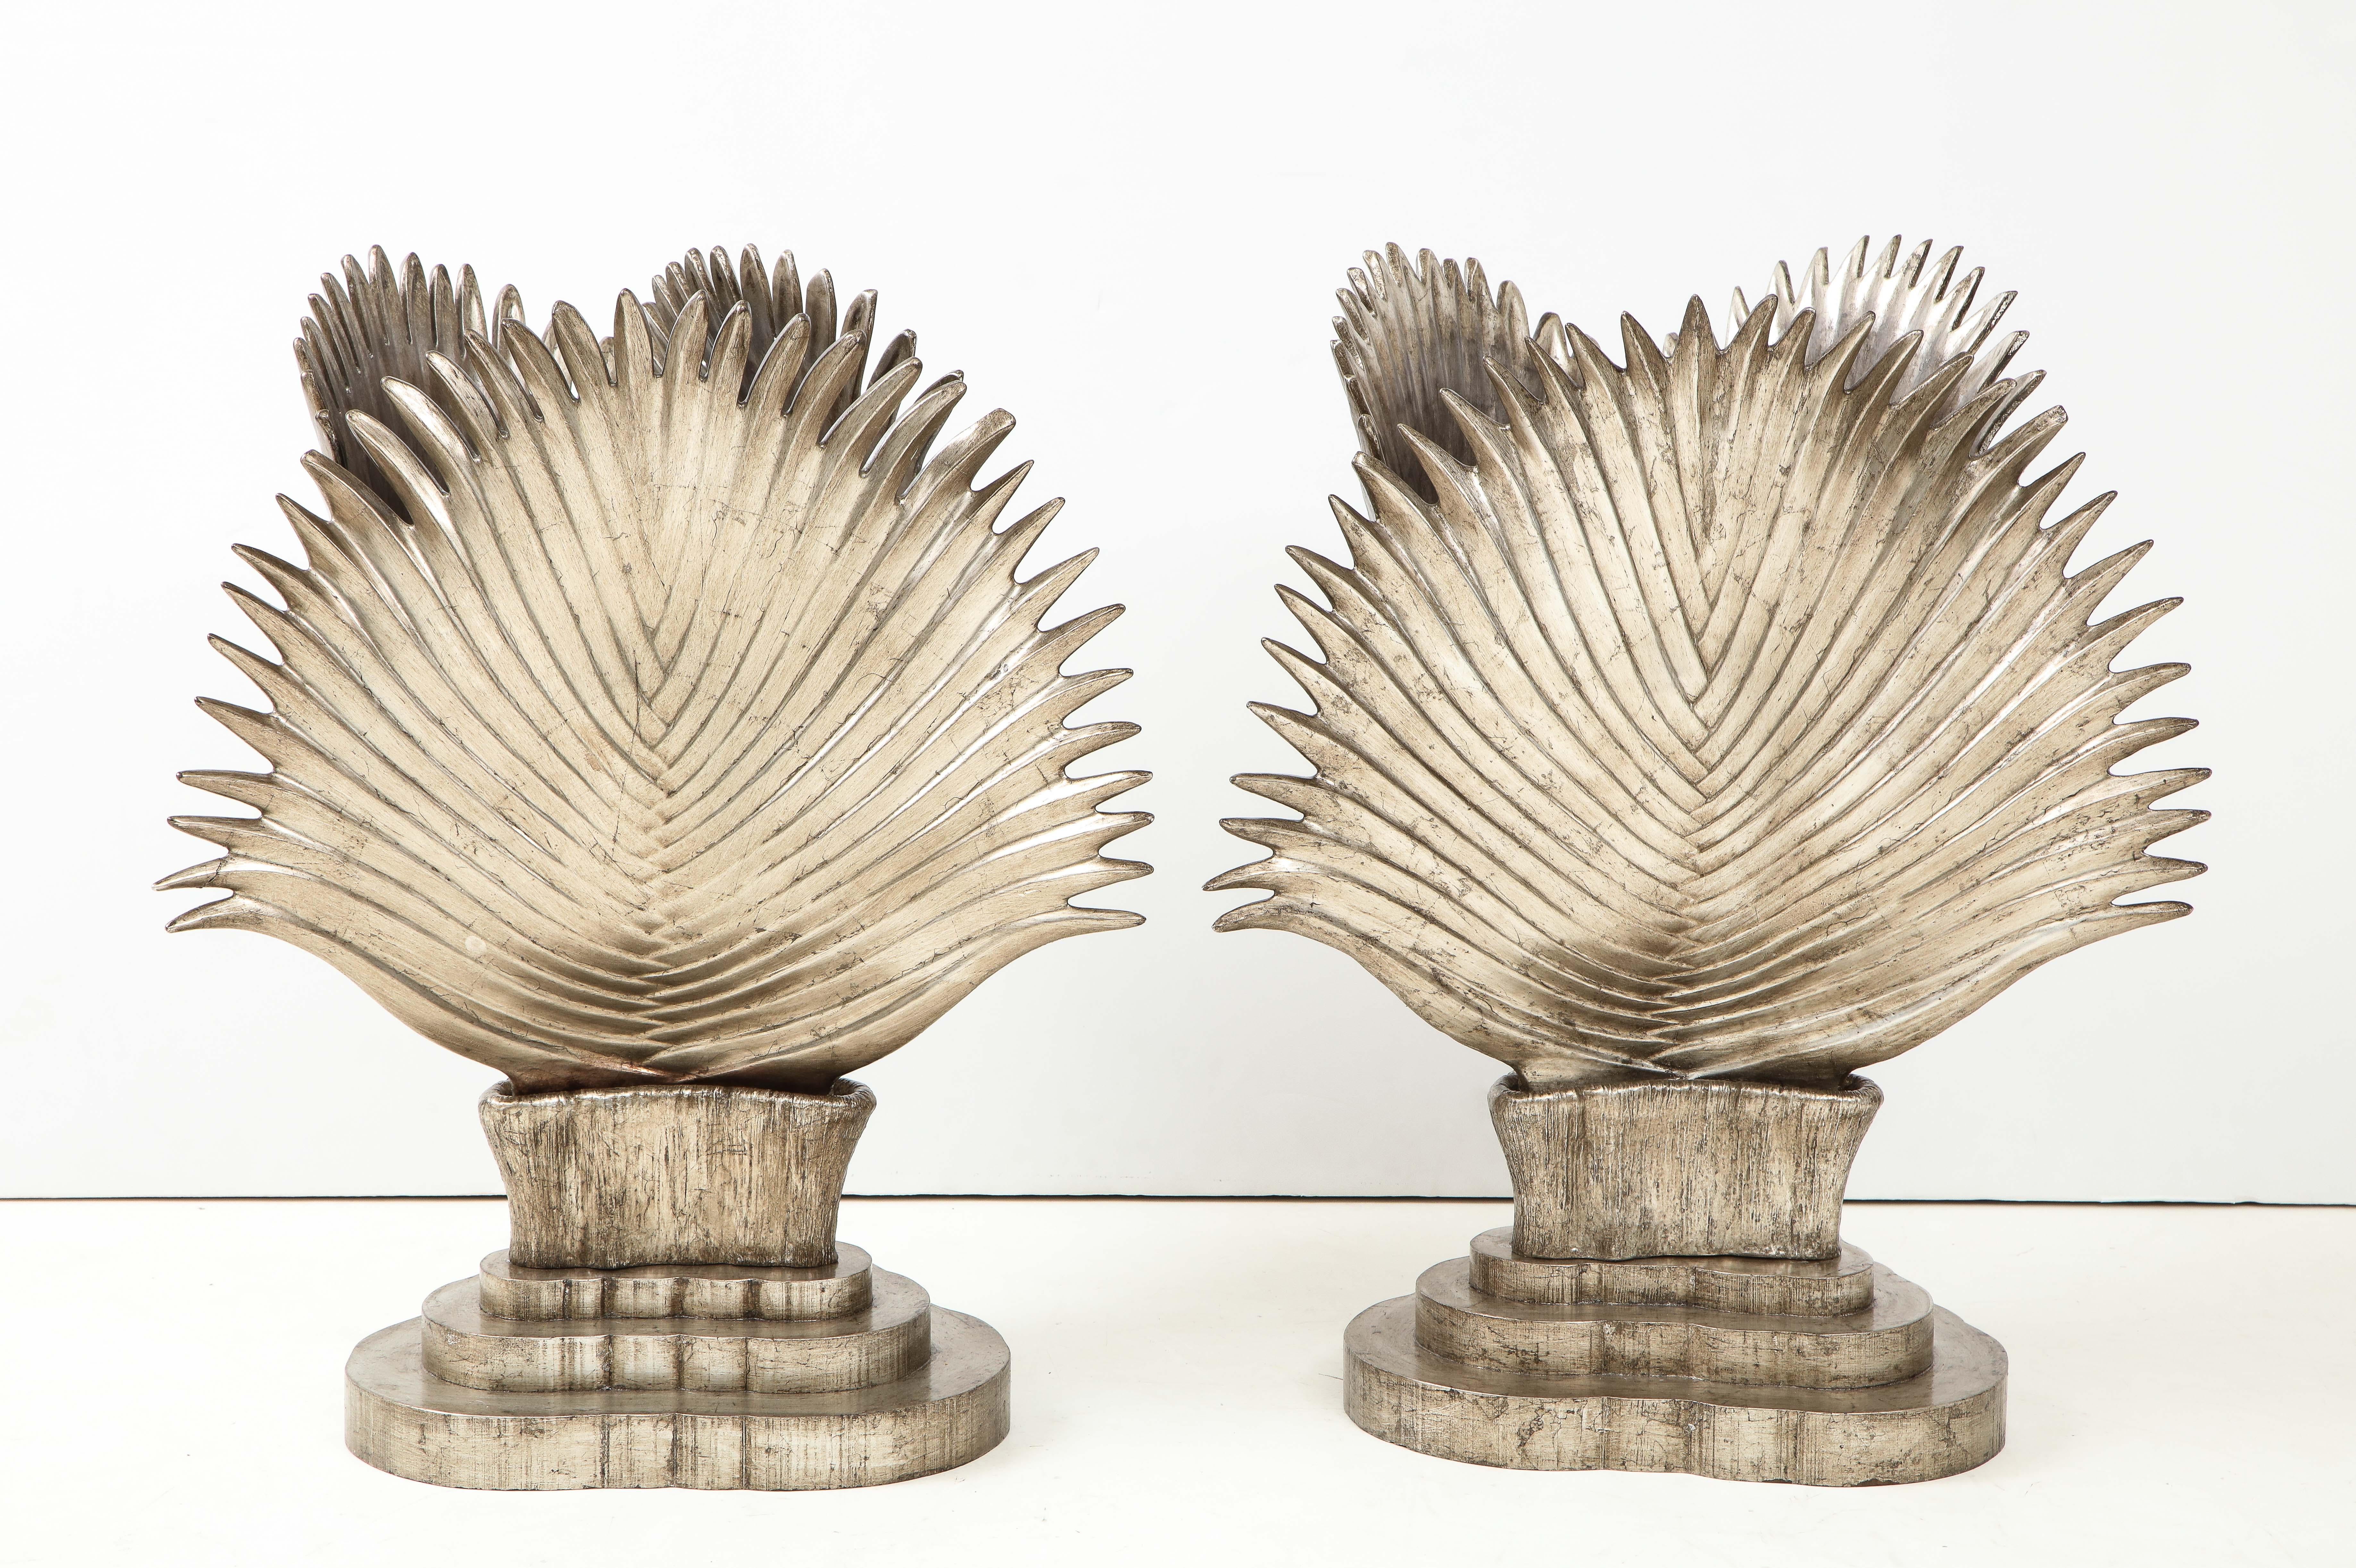 Spectacular pair of Italian ceramic Palm frond lamps.
The three handmade leaves are joined together to create a triangular shape and
they have a beautiful glazed silver leaf finish which looks like metal.
The lamp bodies sit on tiered wooden